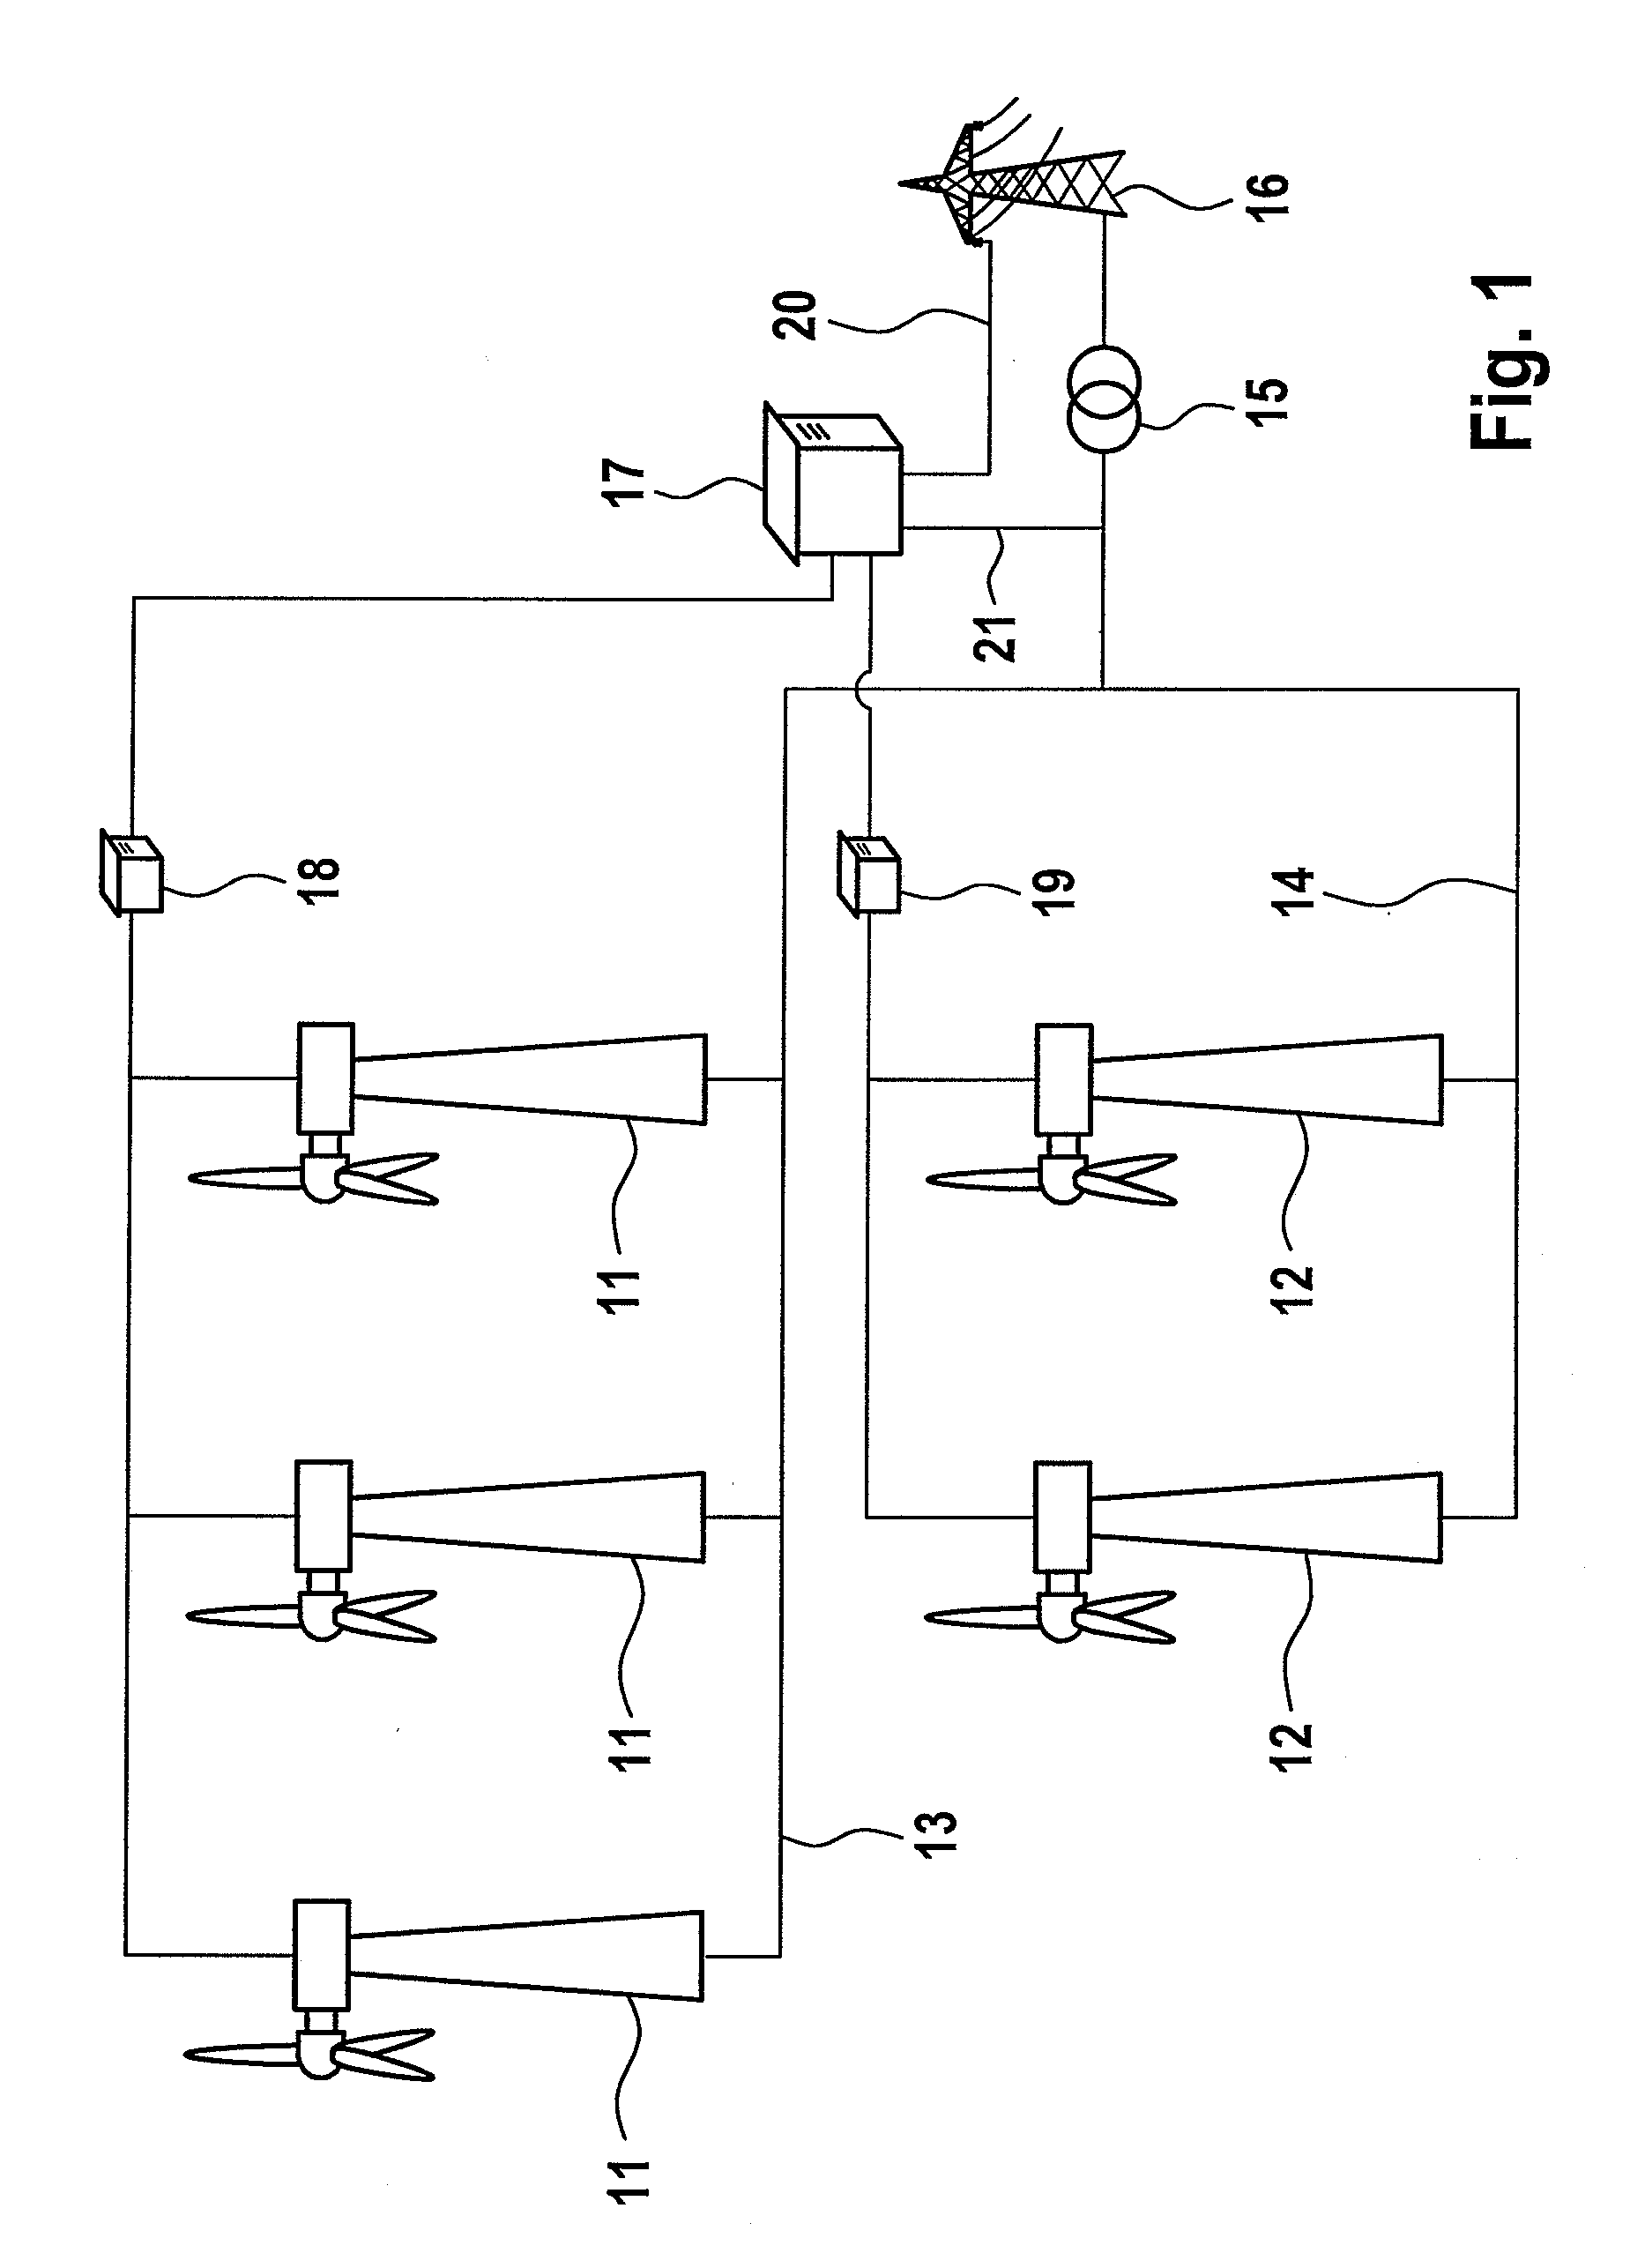 Wind farm and method for controlling a wind farm